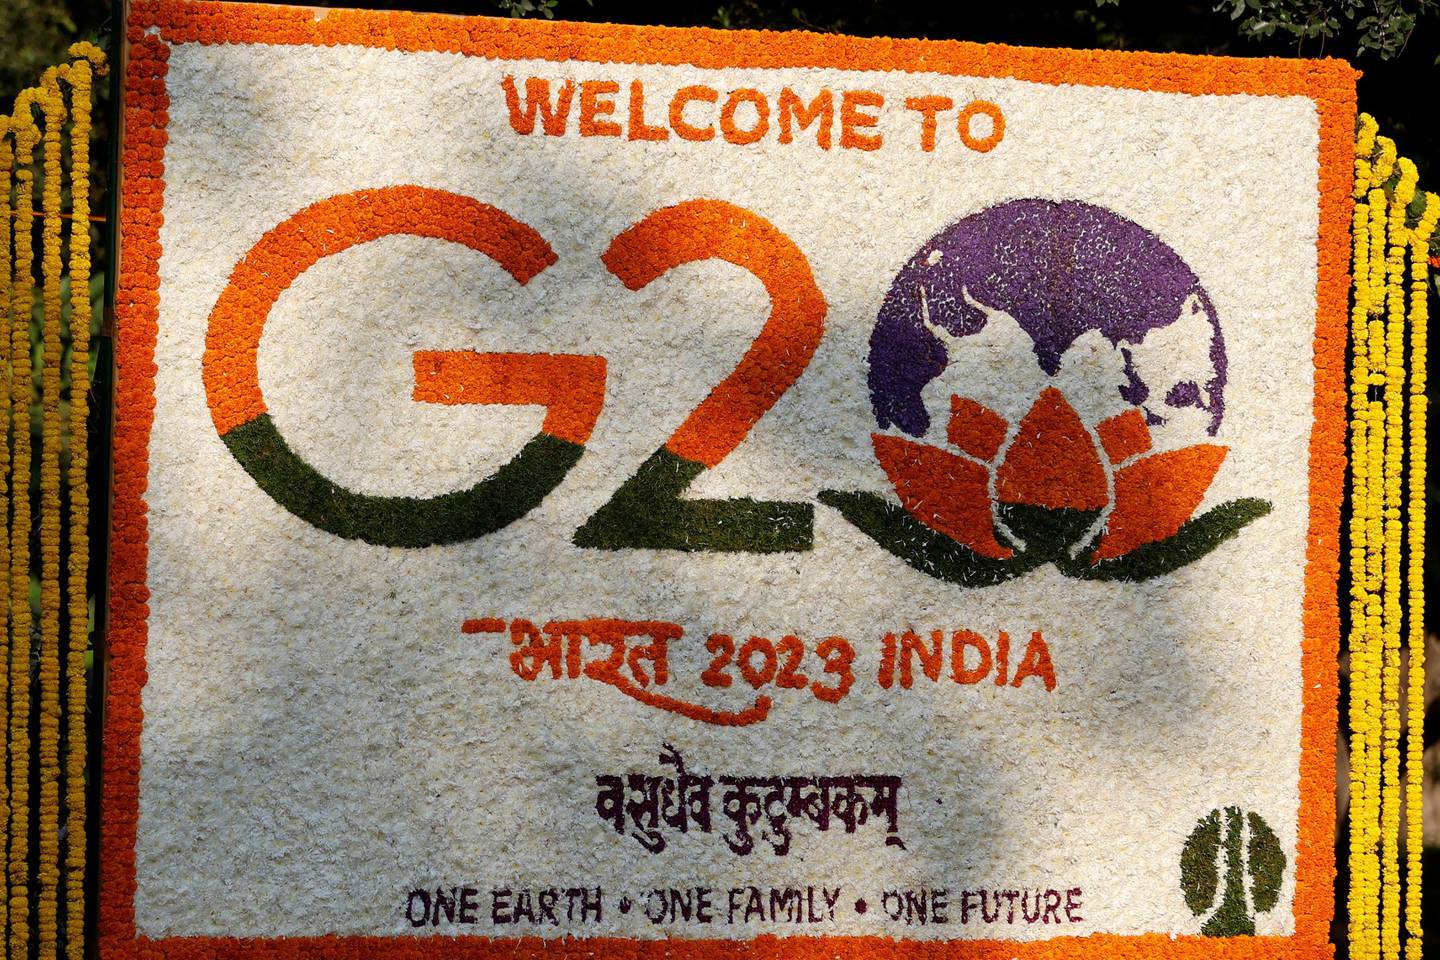 The National reports from the G20 Summit in New Delhi